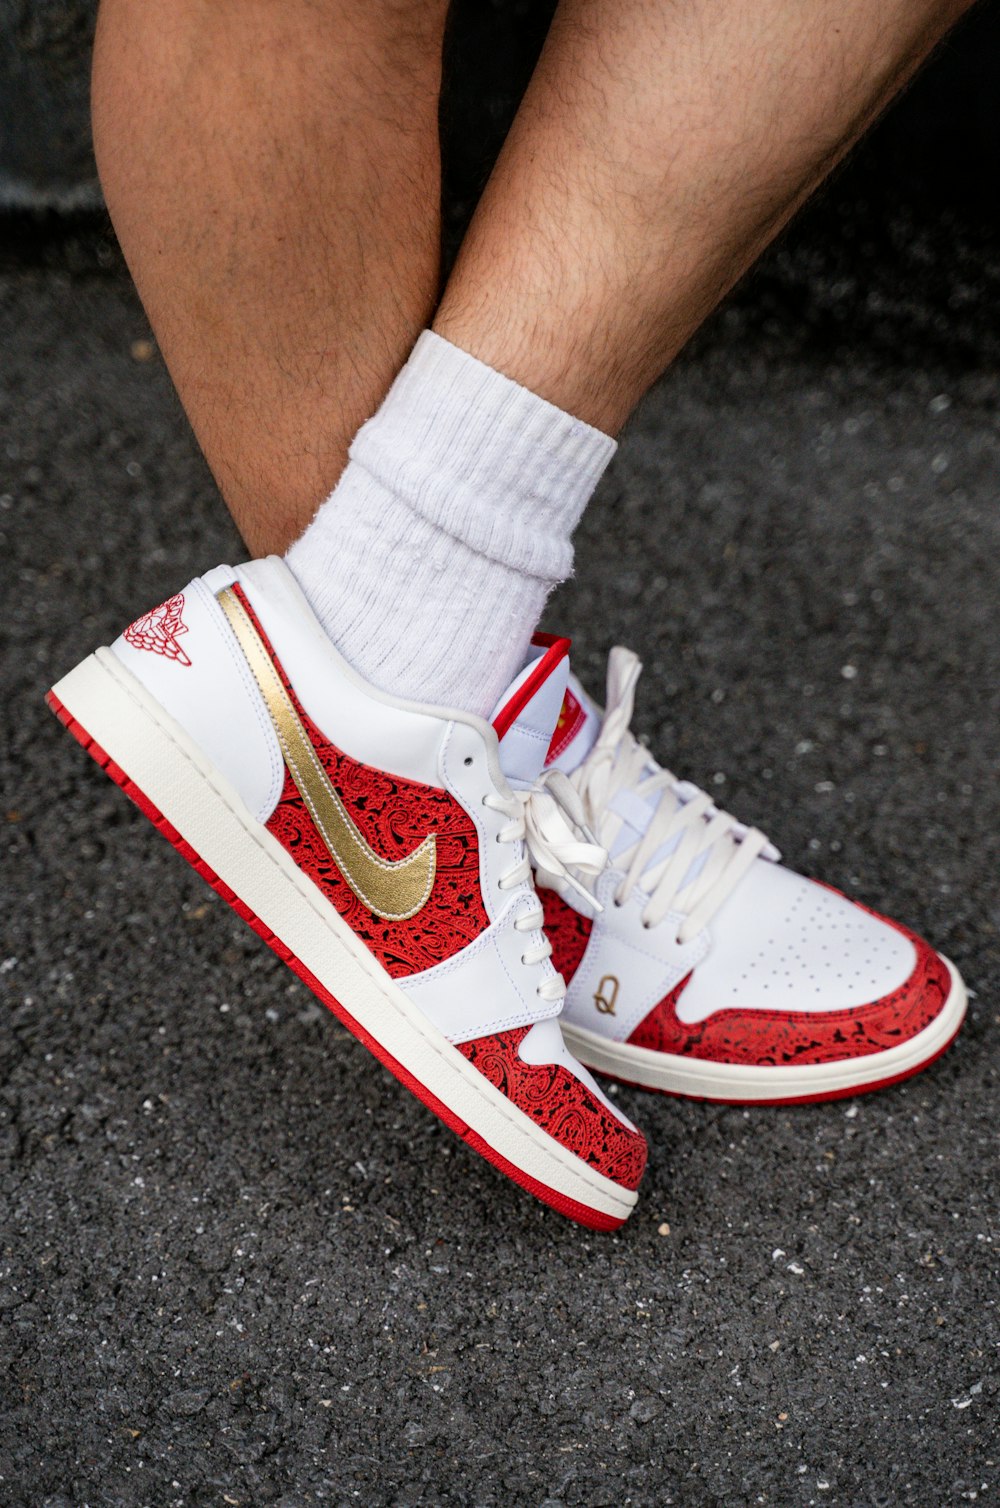 person holding white and red nike air max 90 photo – Free Image on Unsplash